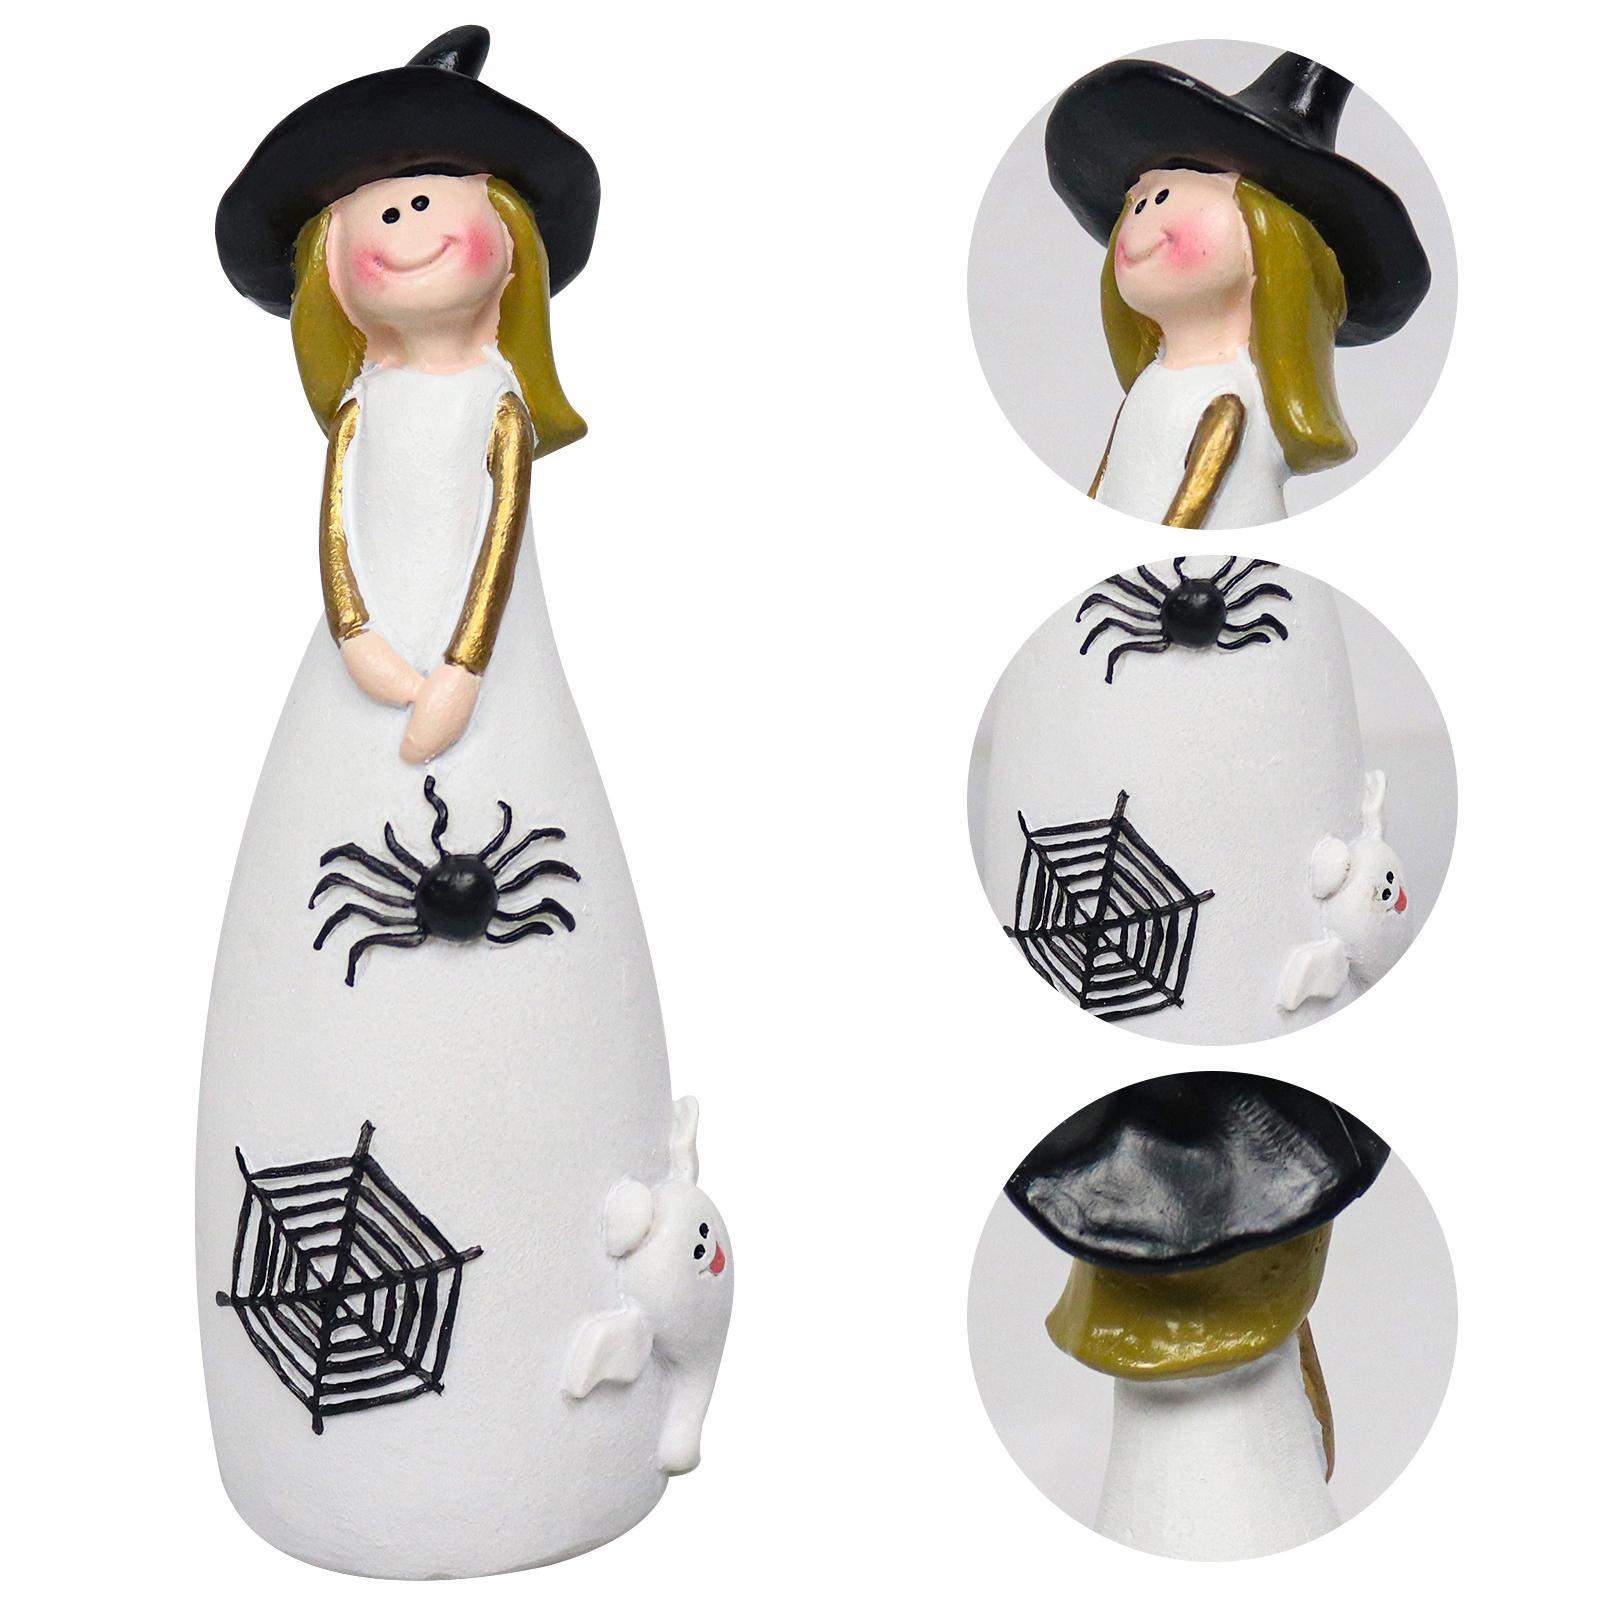 2x Halloween Witch Figurine Adorable Witch Statue for Holiday Party Decor